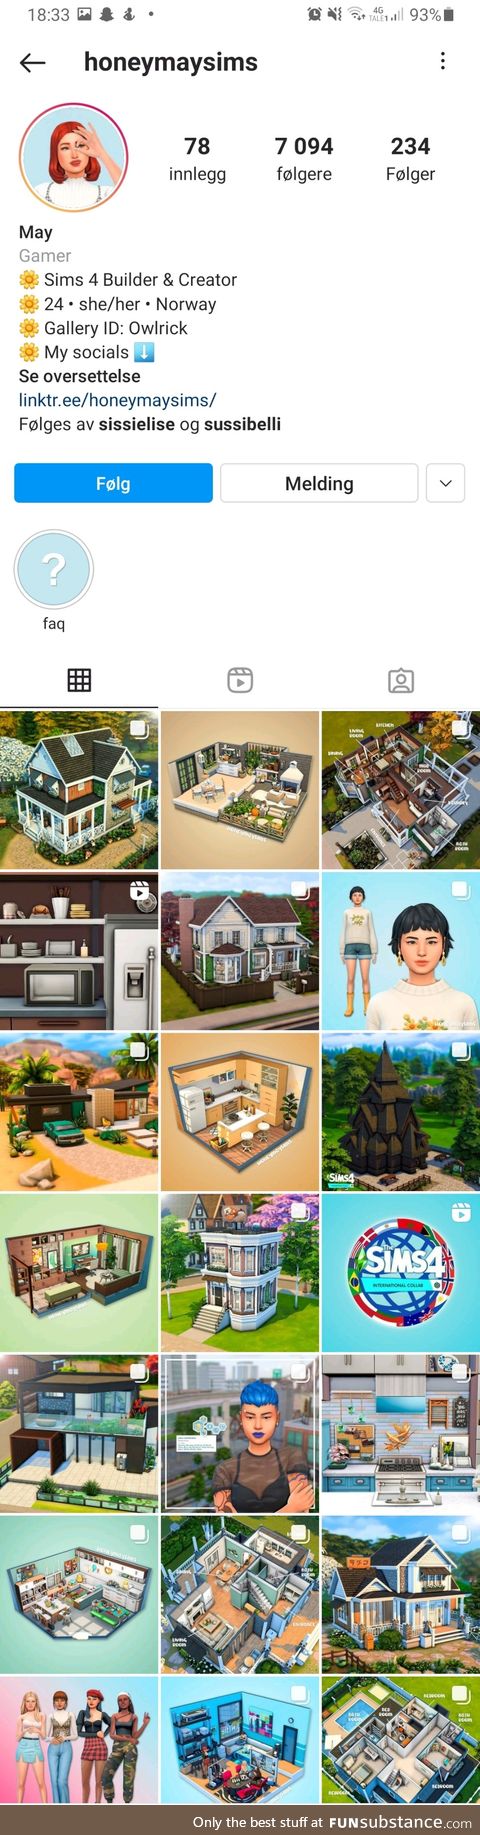 Anyone else who love sims? Found this profile. Great inspiration